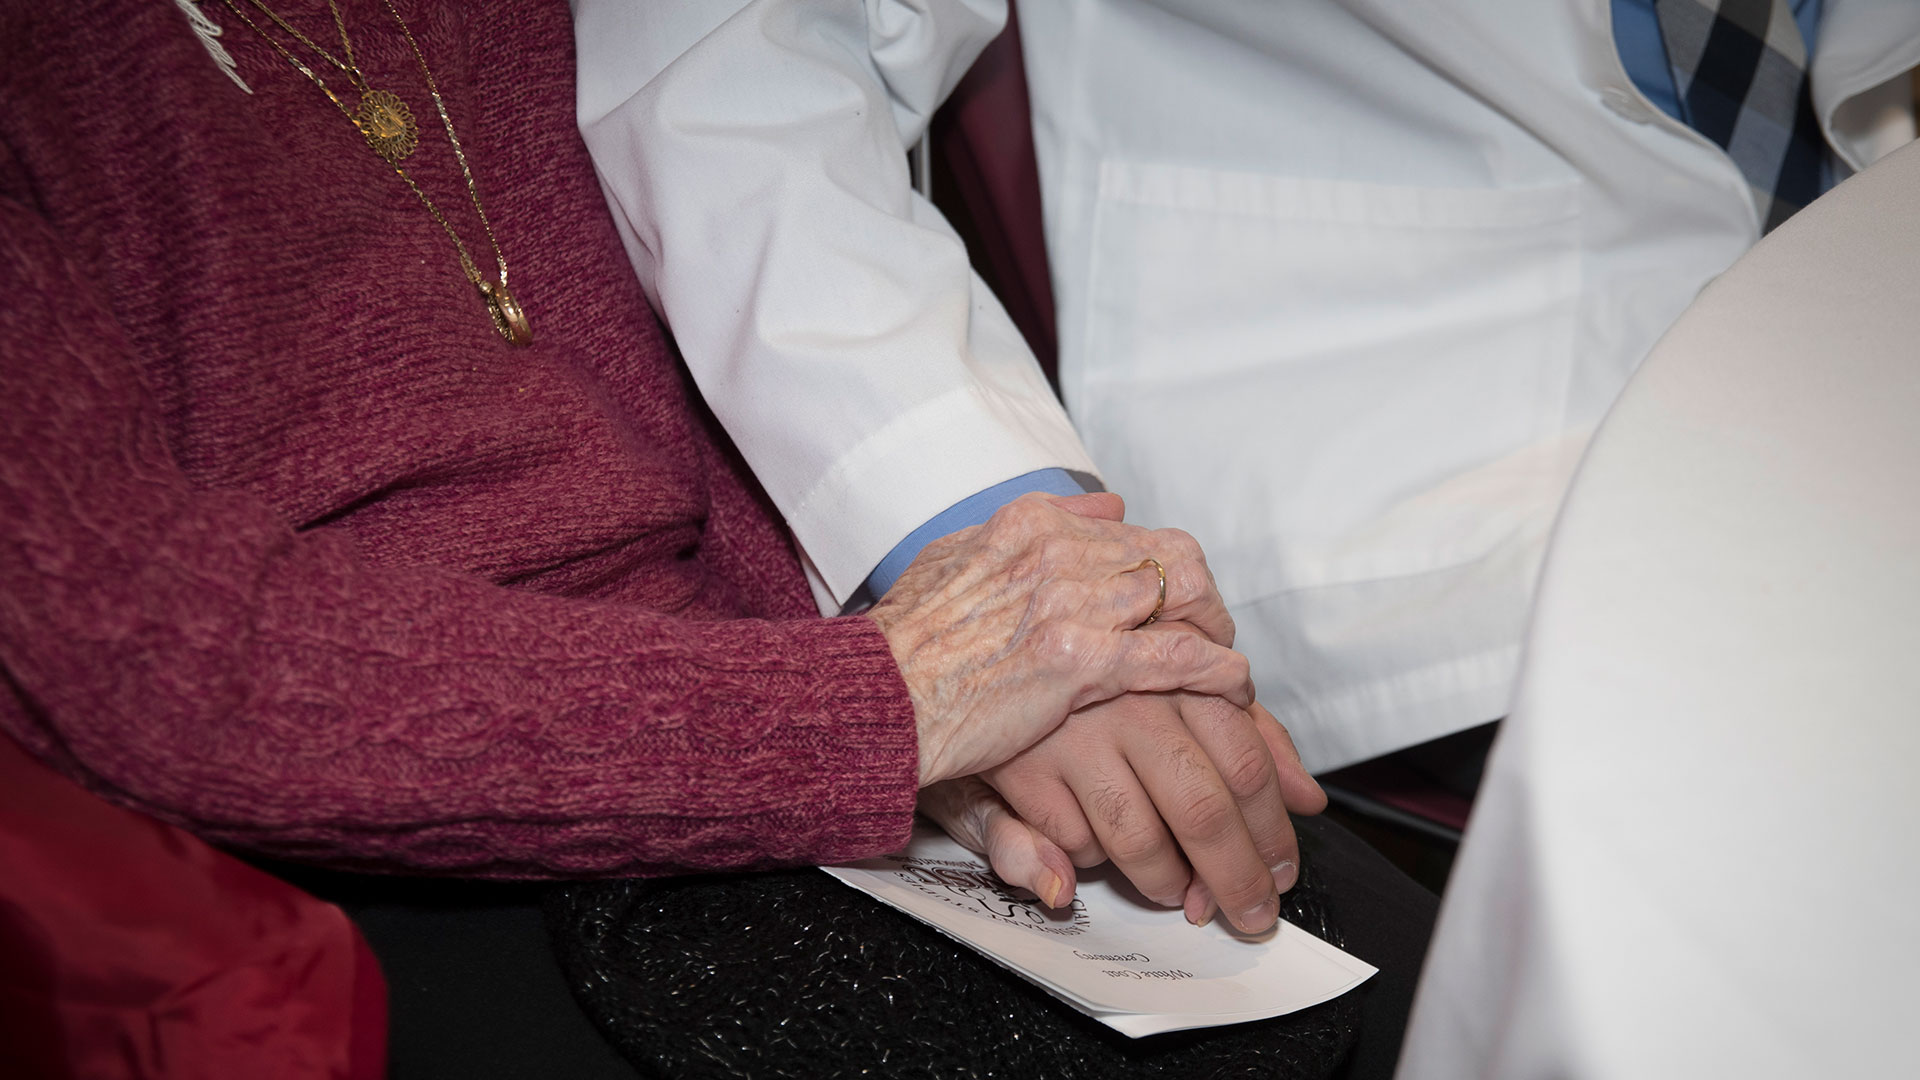 A student holds a woman's hand during the Physician Assistant White Coat Ceremony.